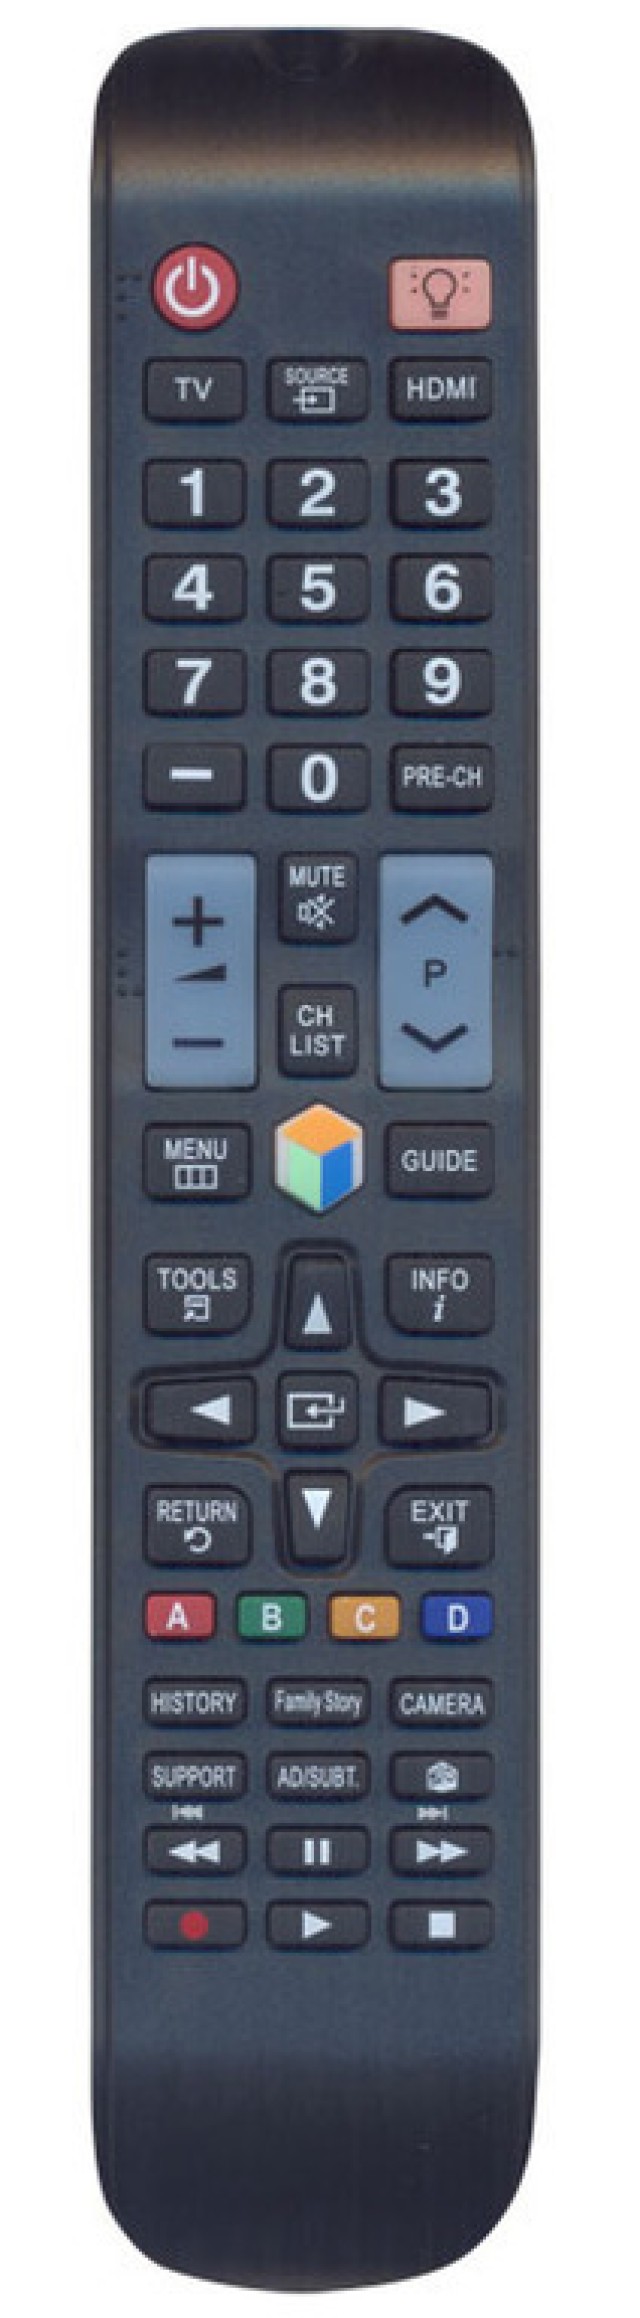 OEM, 0125, Remote control compatible with SAMSUNG Smart TV